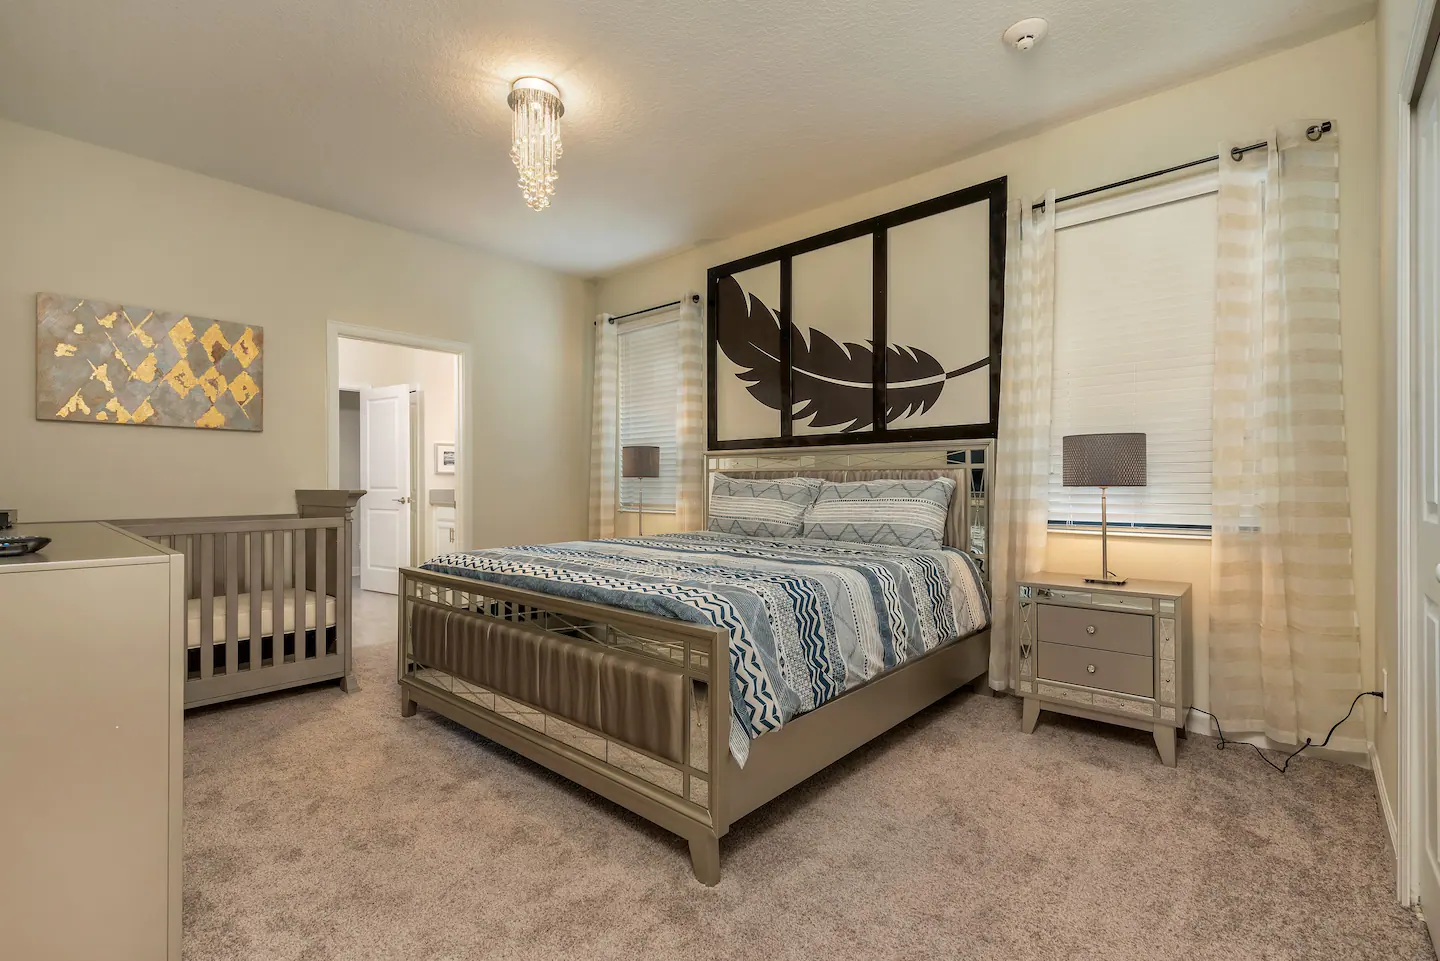 King-size bed + Baby Crib in the Master Suite